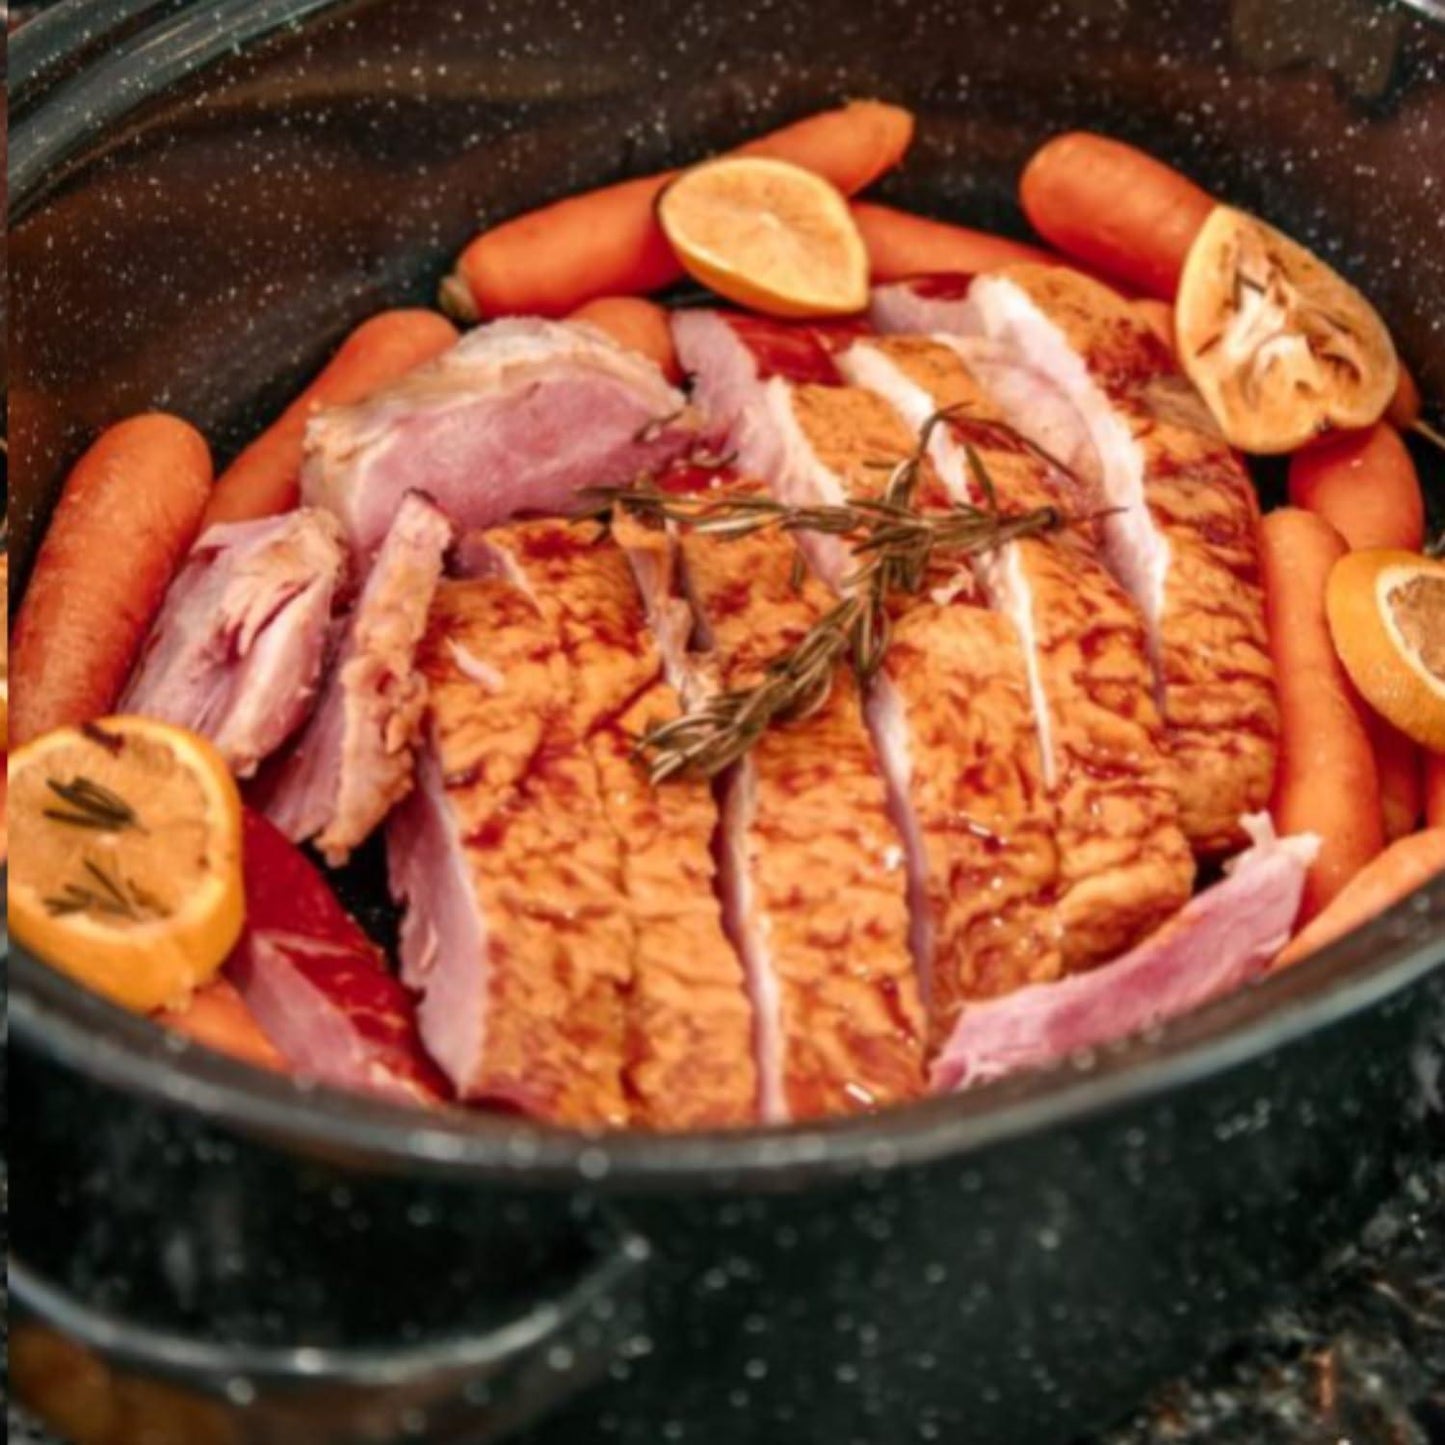 Granite Ware 19 inch oval roaster with Lid design to accommodate up to 20 lb poultry/roast. Resists up to 932°F - CookCave